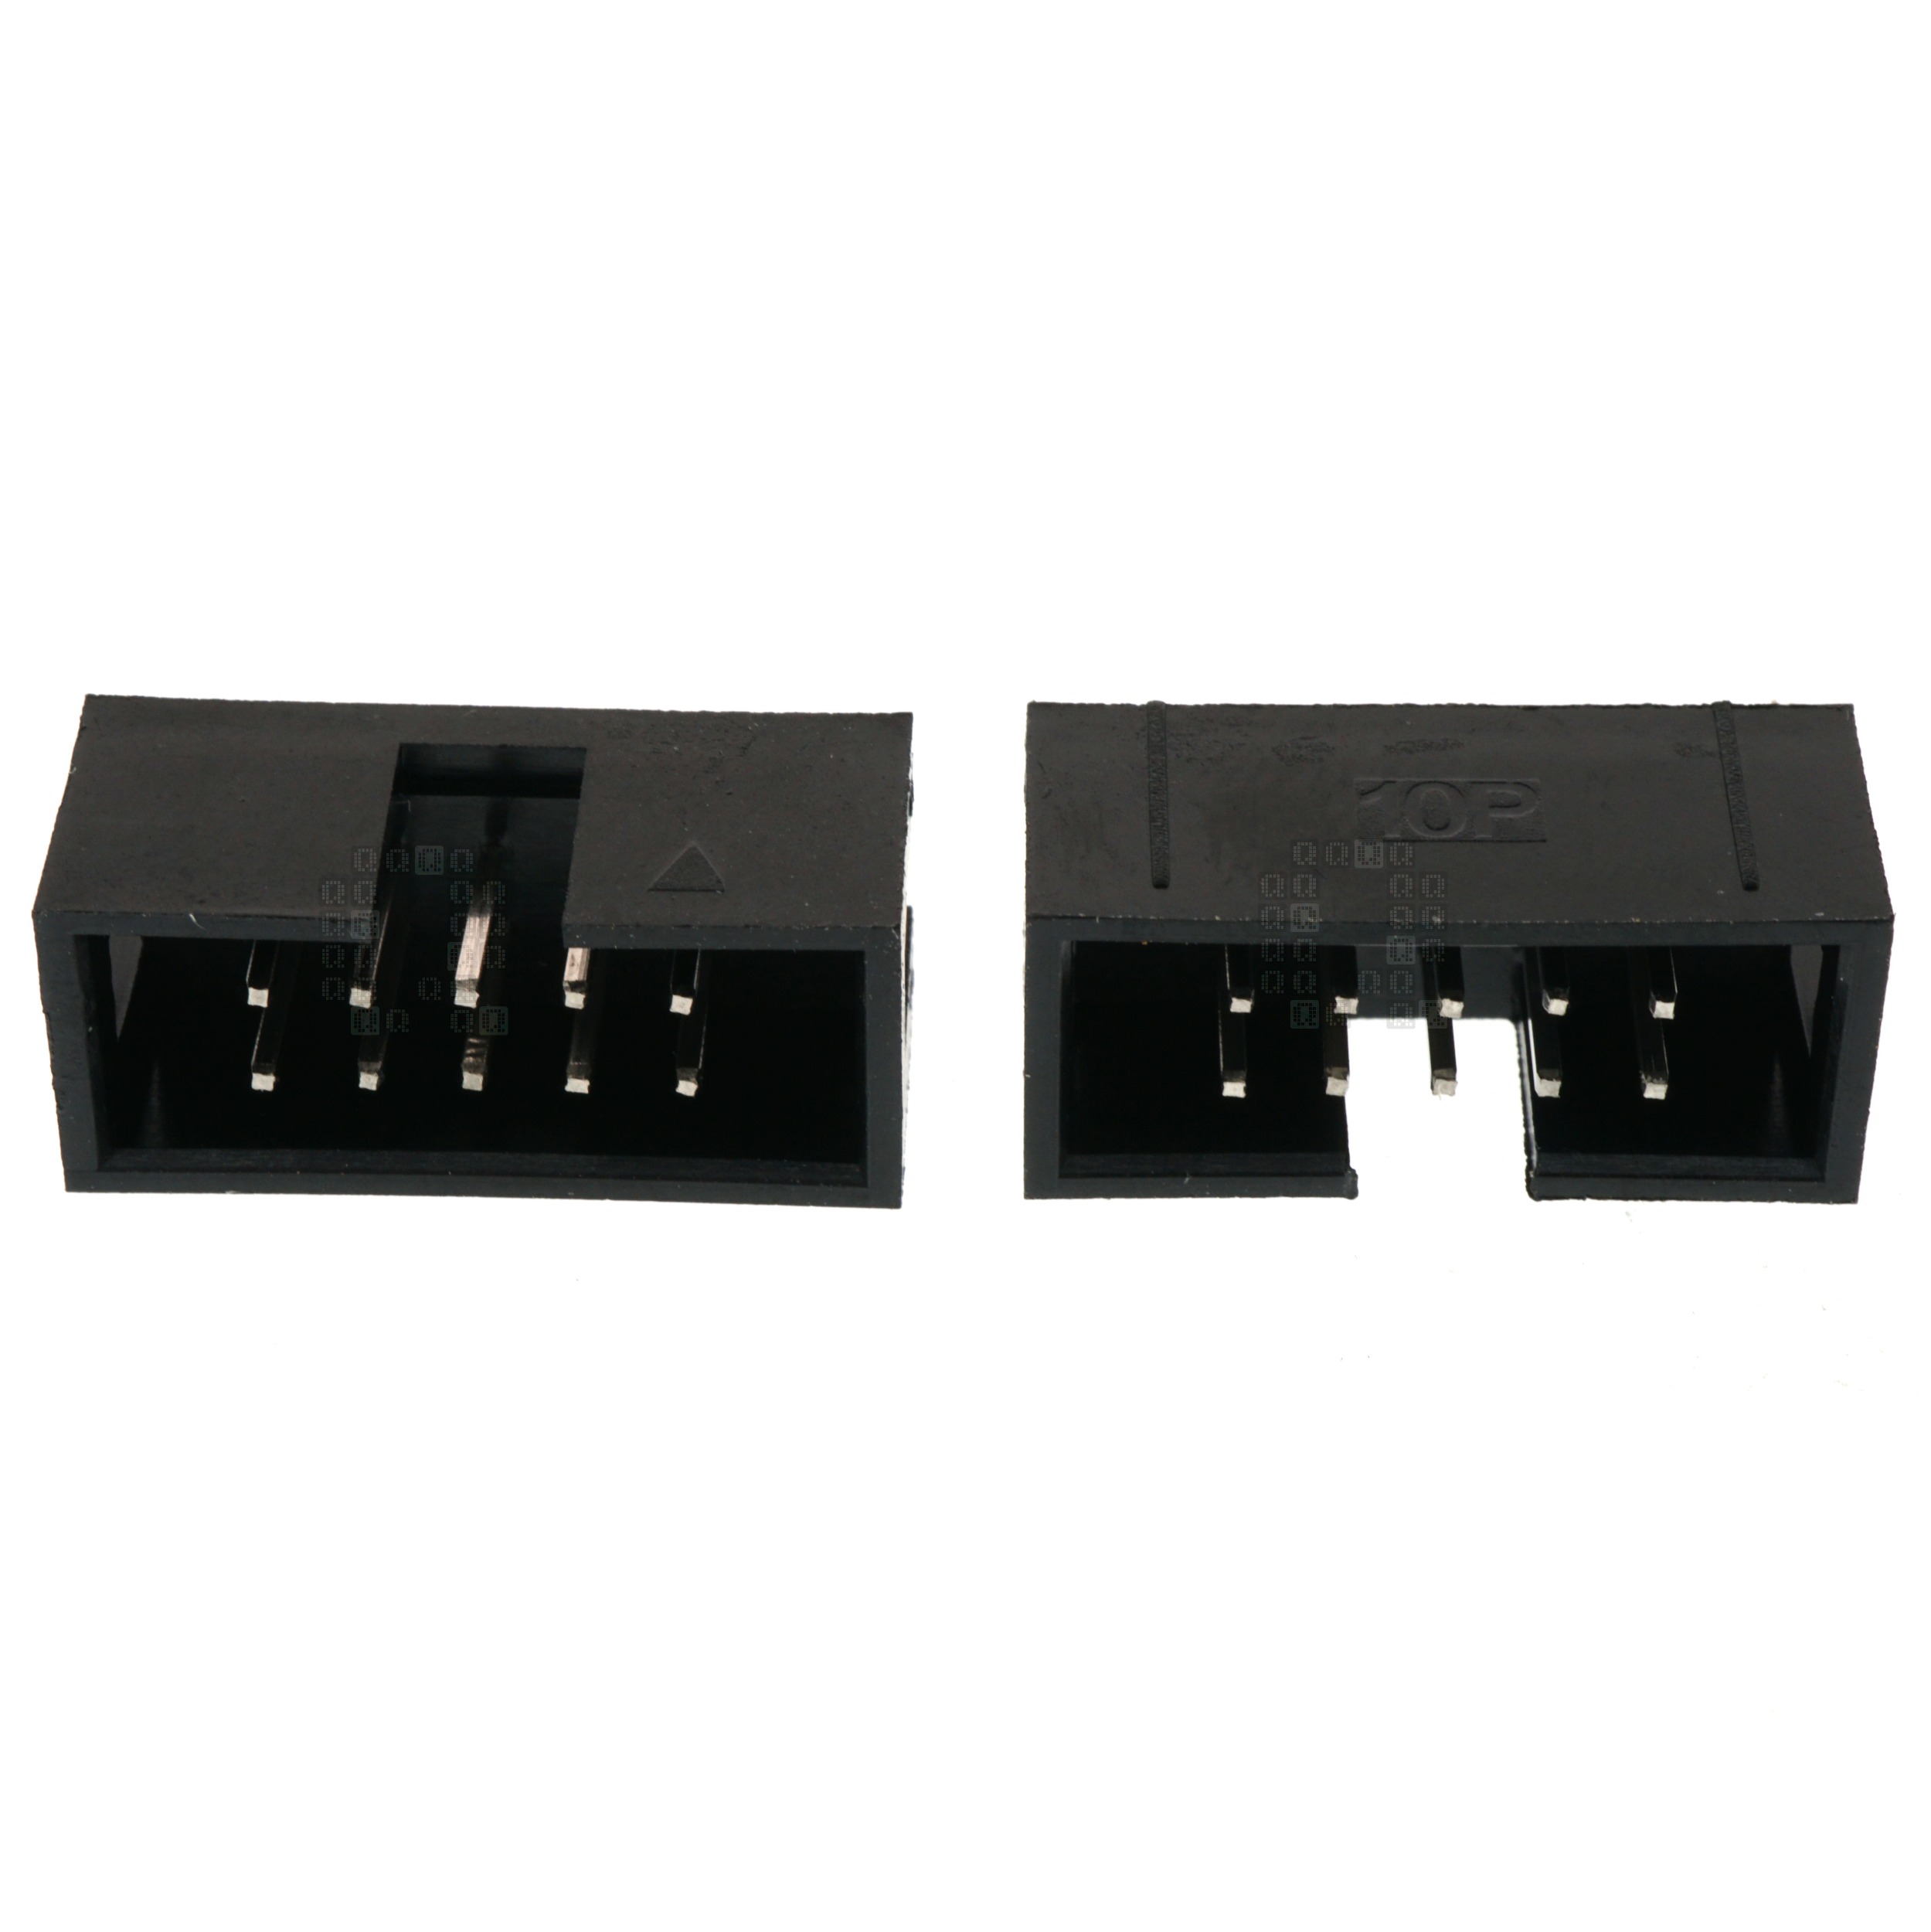 2x5 (10-Pin) Through Hole Straight Box Header Connector, 2.54mm Pitch, 2-Pack